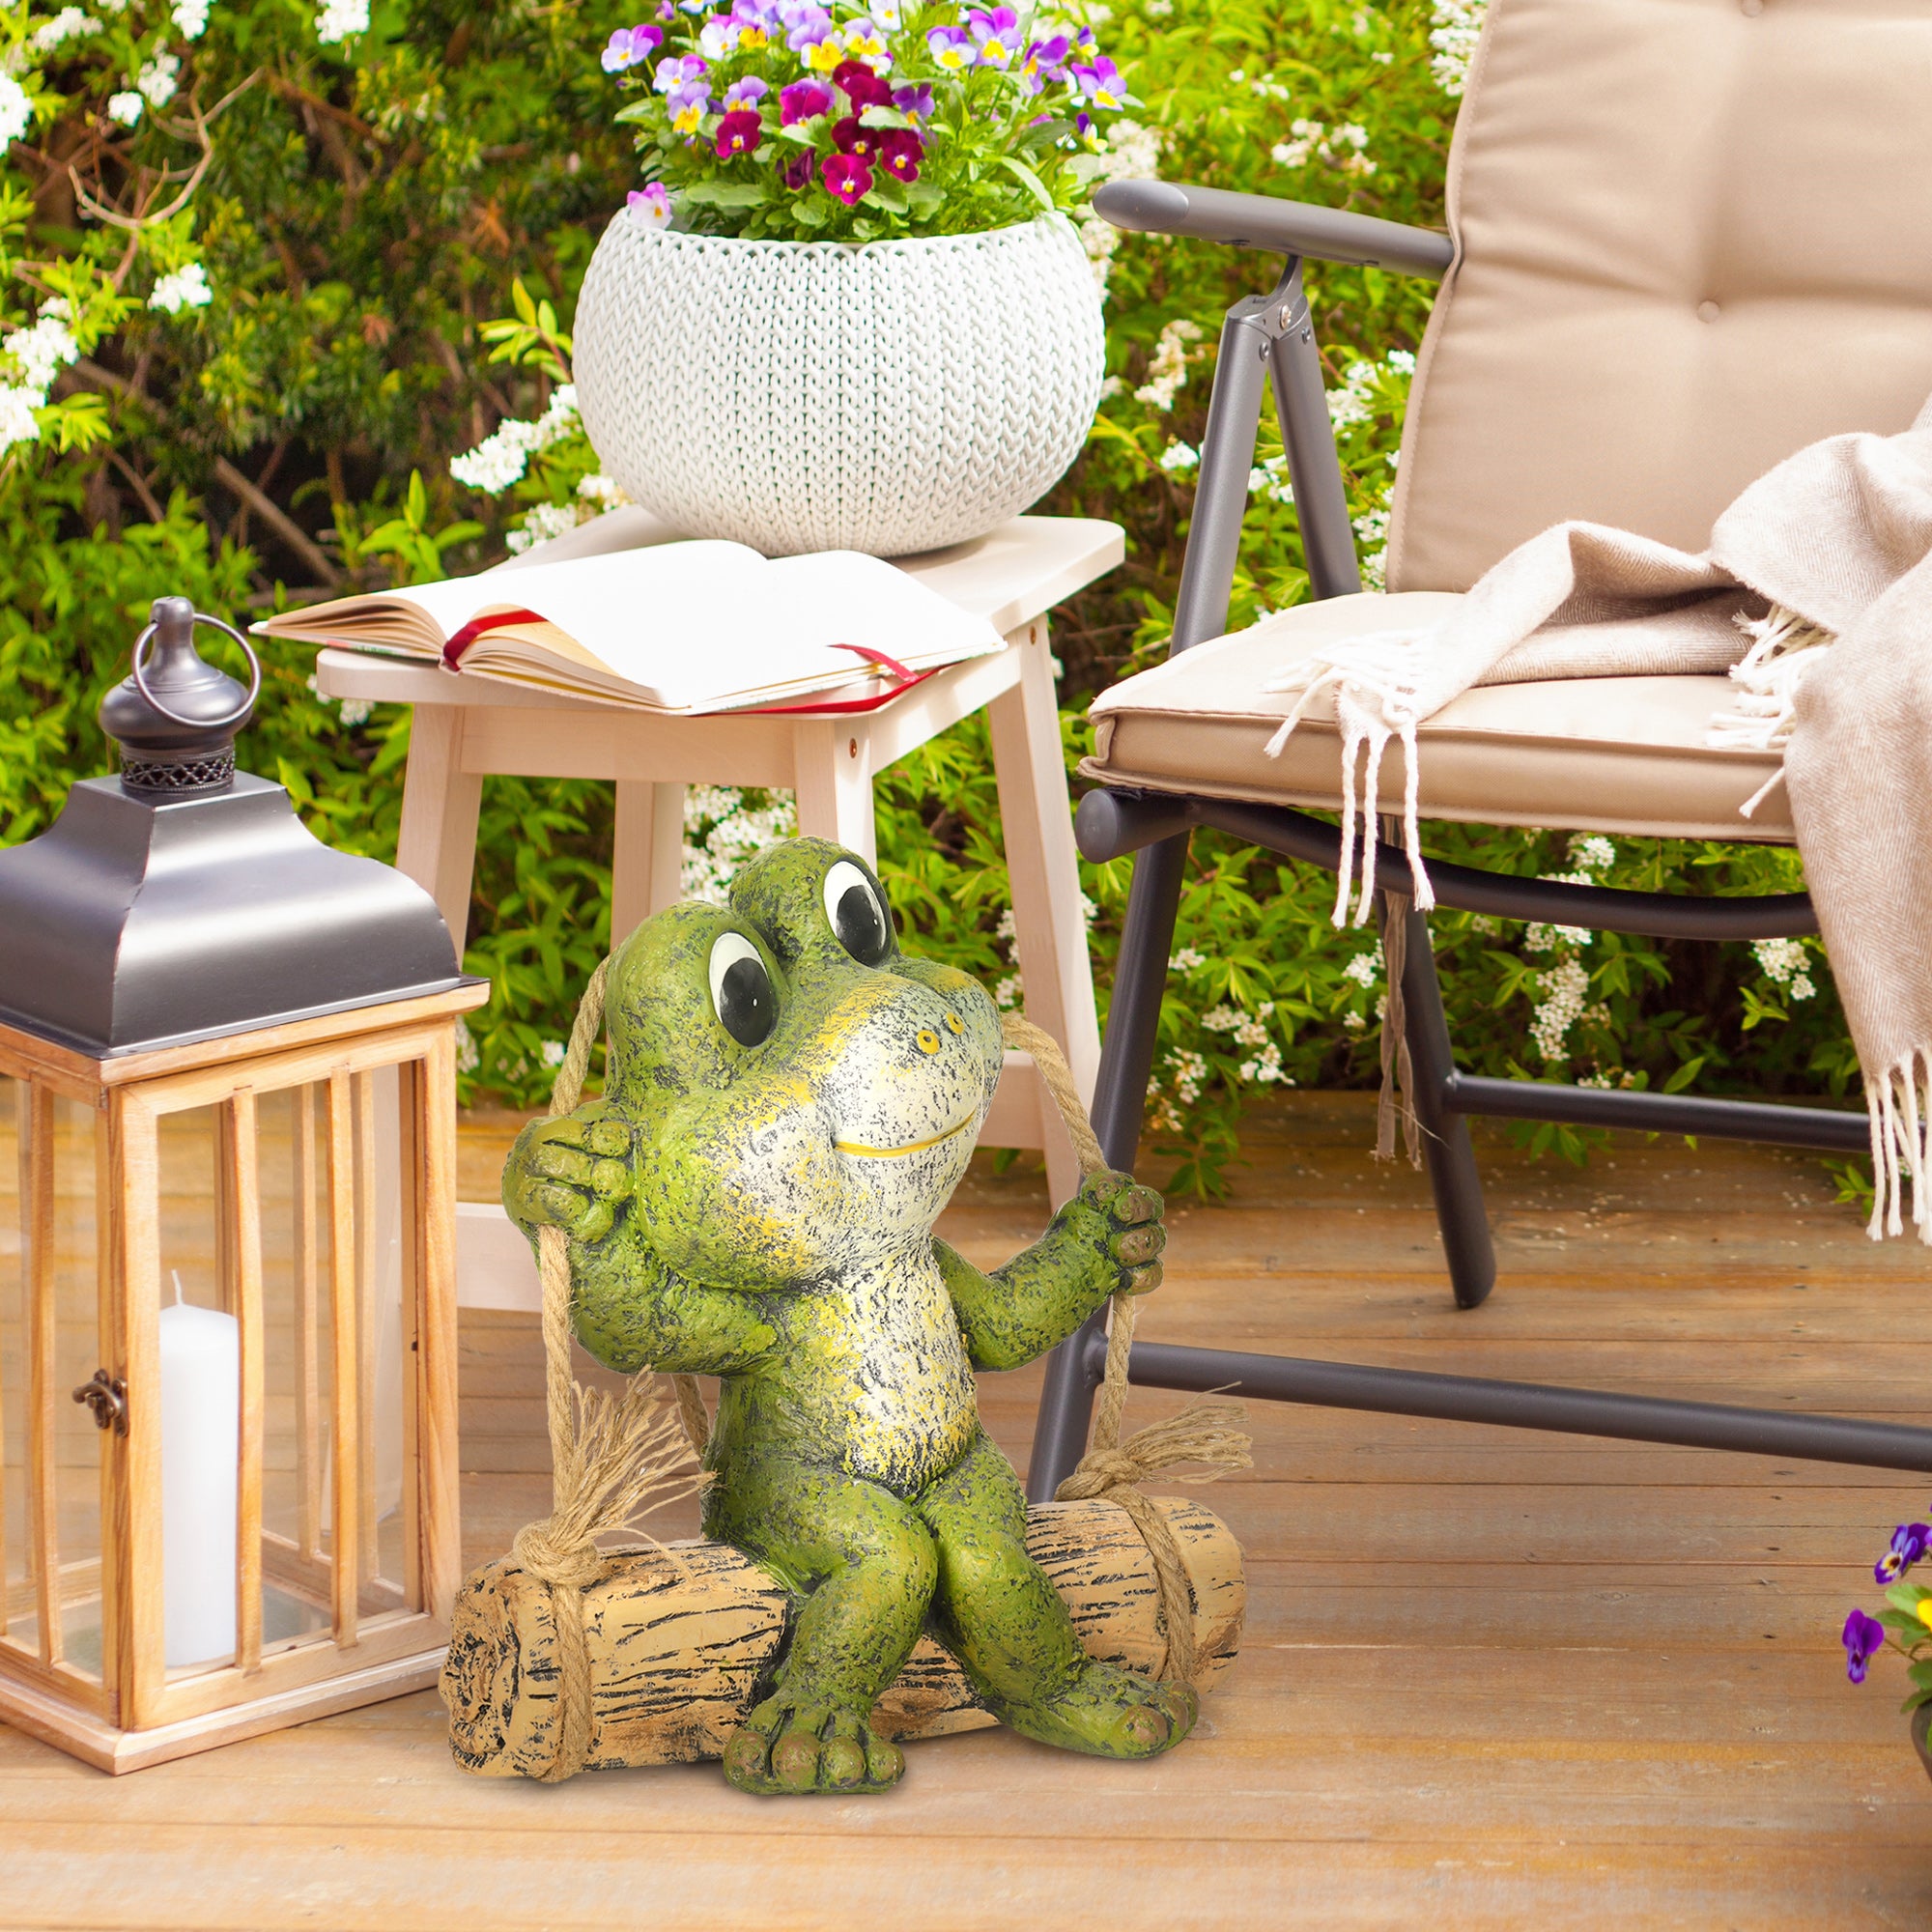 Outsunny Hanging GardenÂ Statue, Vivid Frog on Swing Art Sculpture, Outdoor Ornament Home Decoration, Green